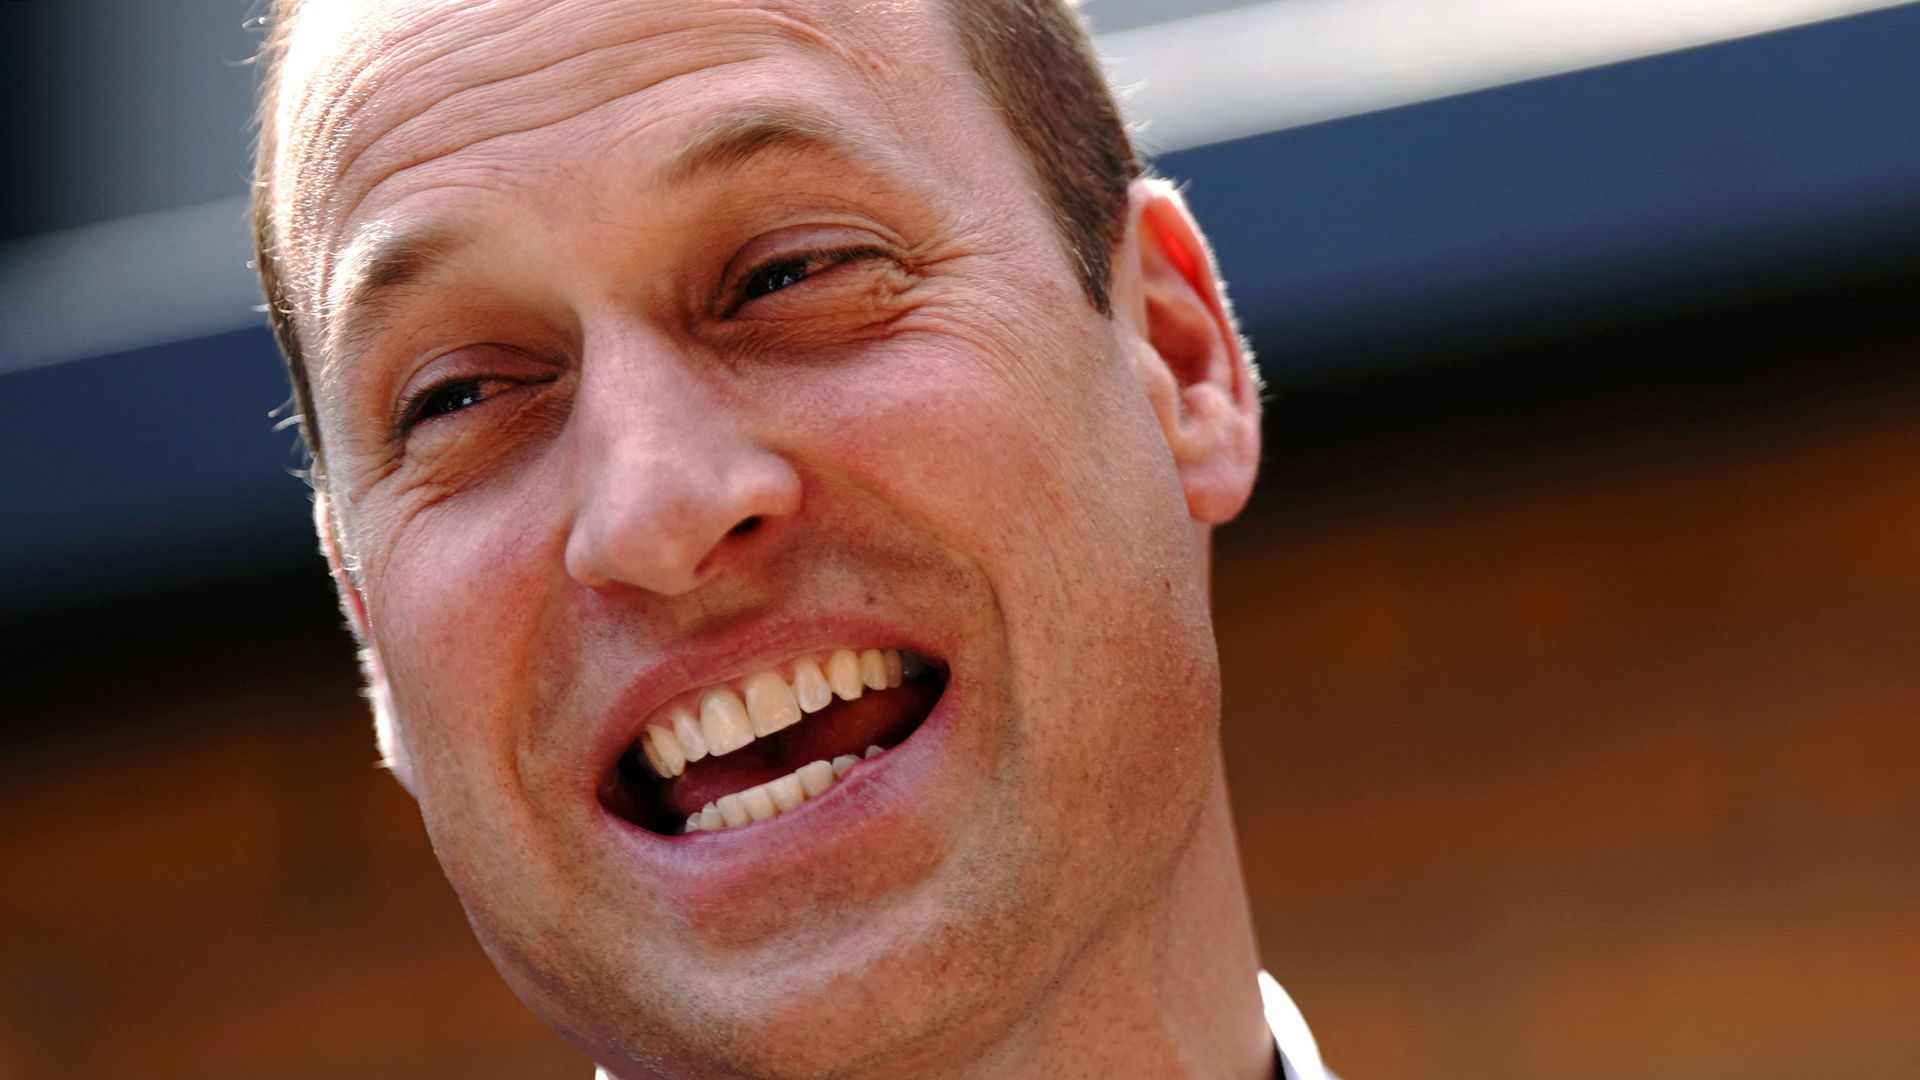 Prince William's future plans to visit local quirky bar revealed